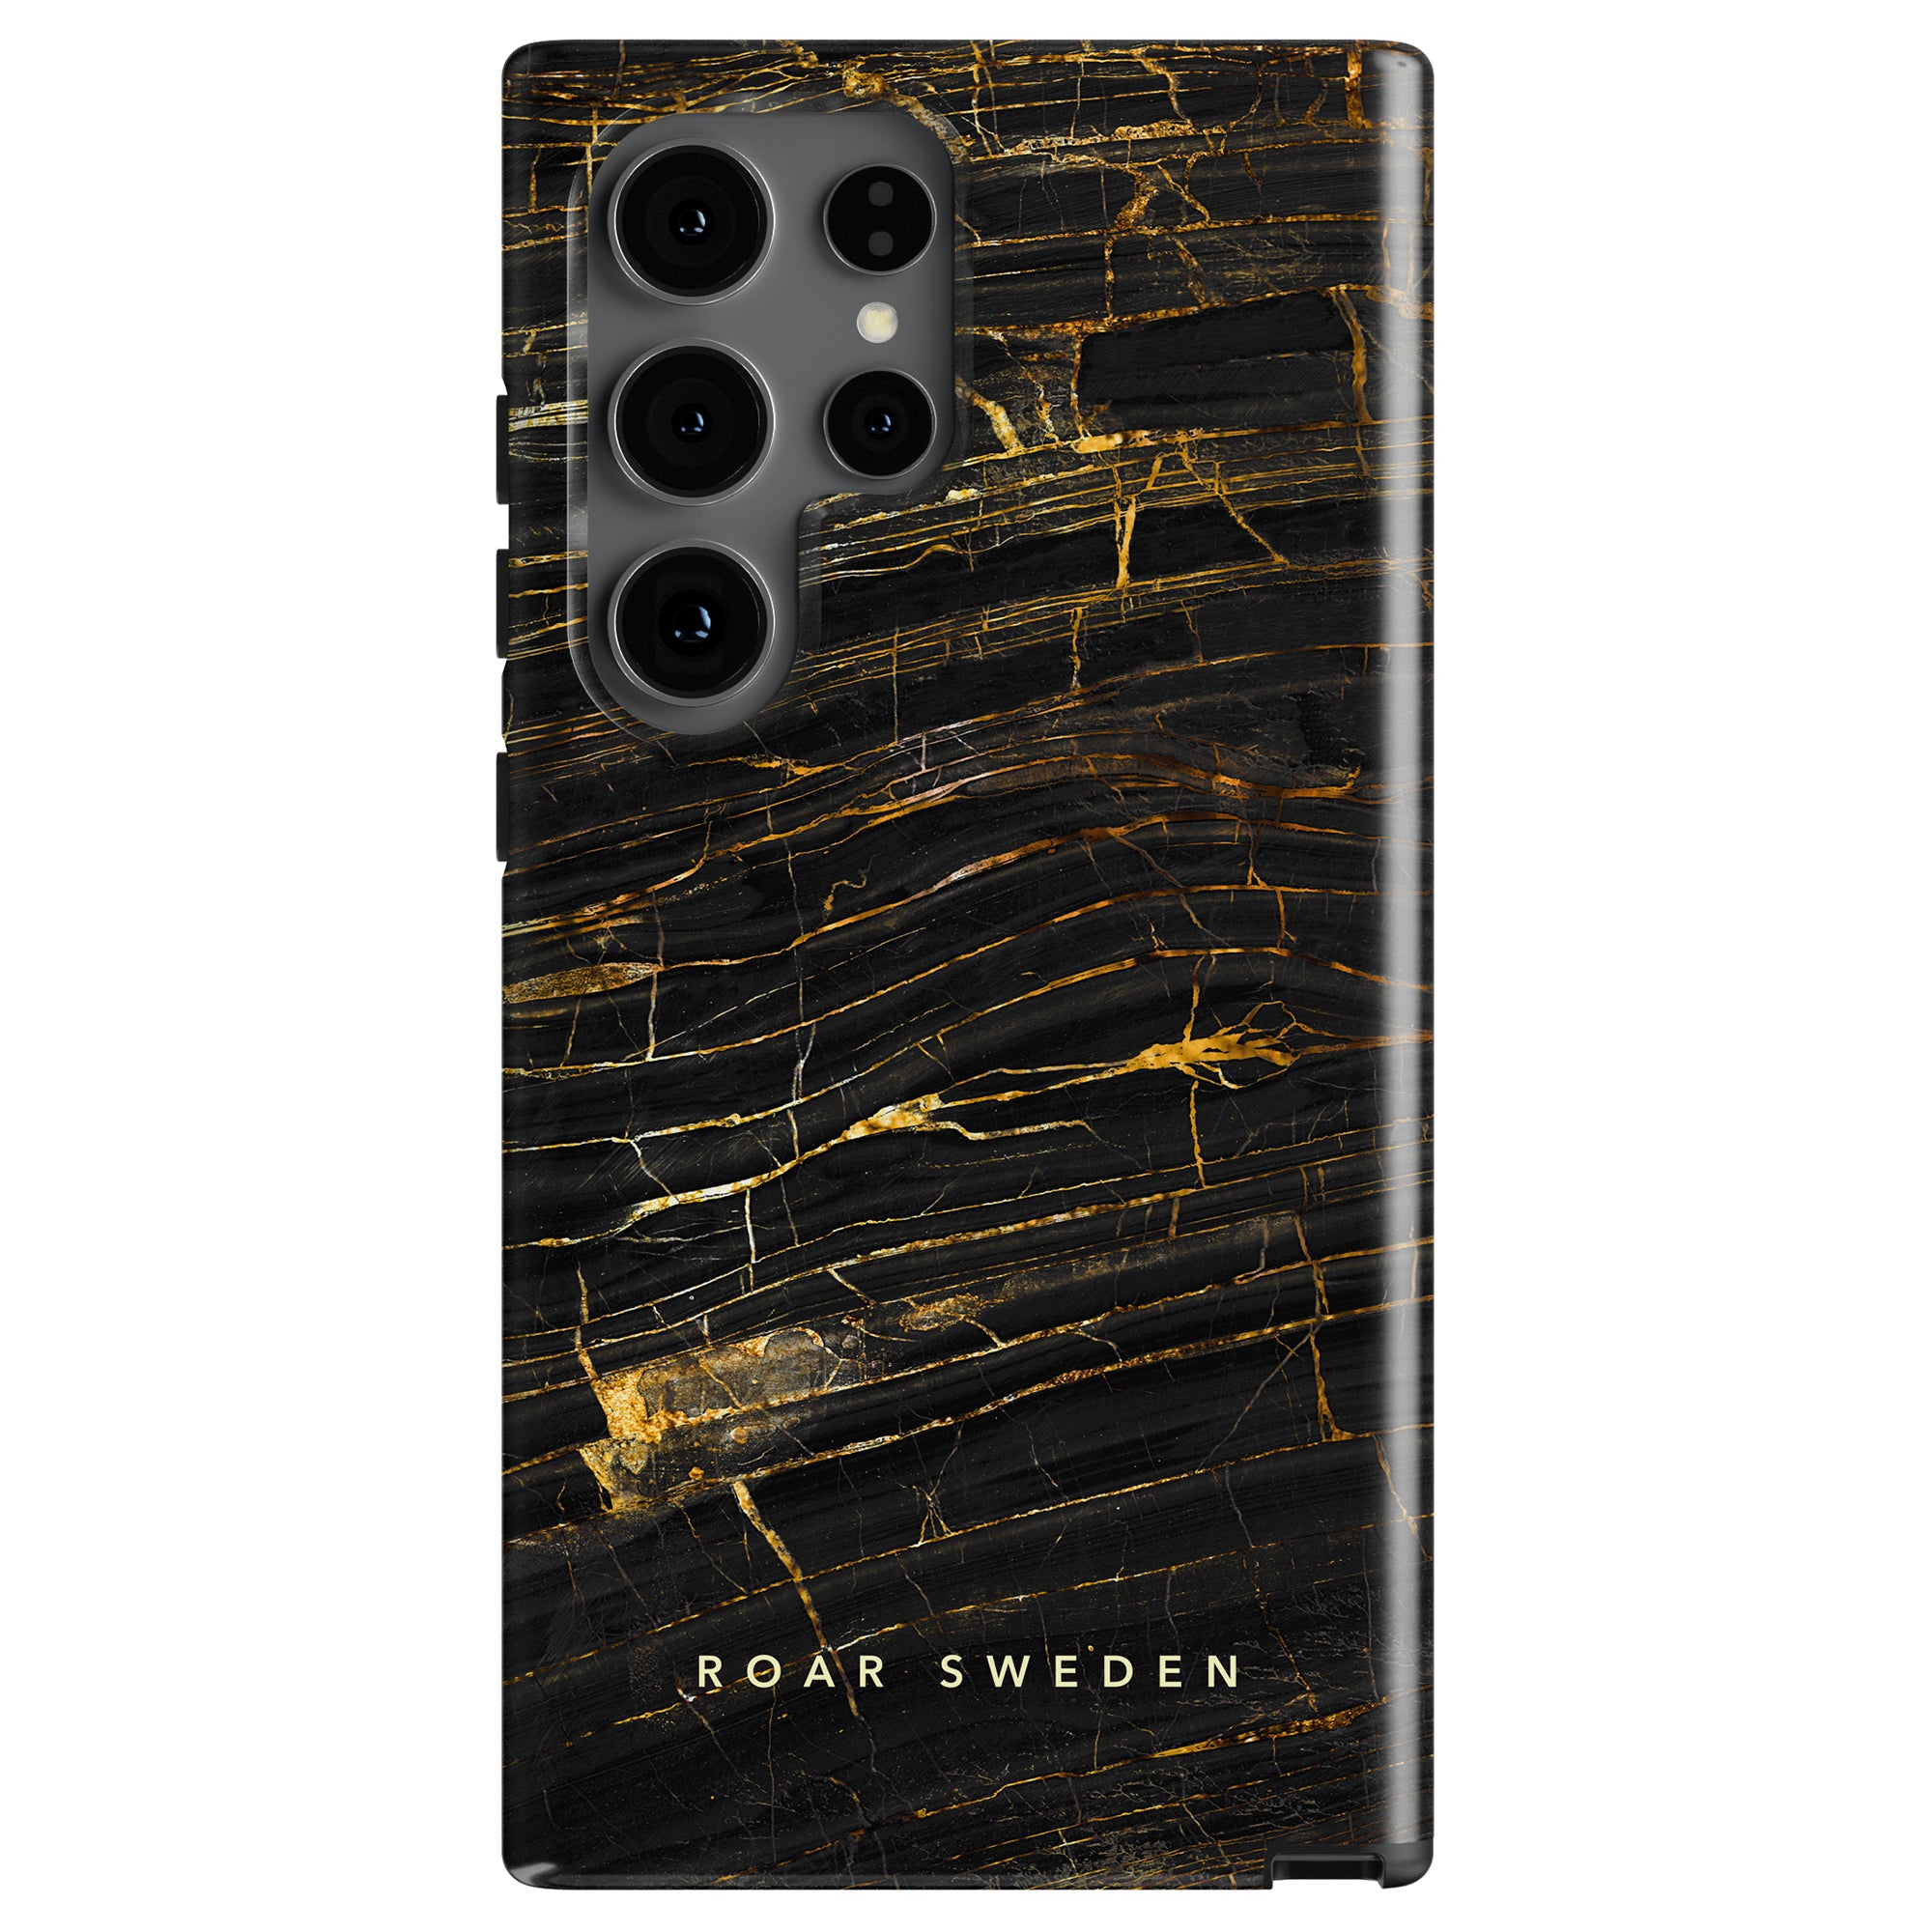 A phone case with a black marble design featuring gold veins and the text "ROAR SWEDEN" at the bottom. This Emperador - Tough Case showcases four camera lenses on the phone.